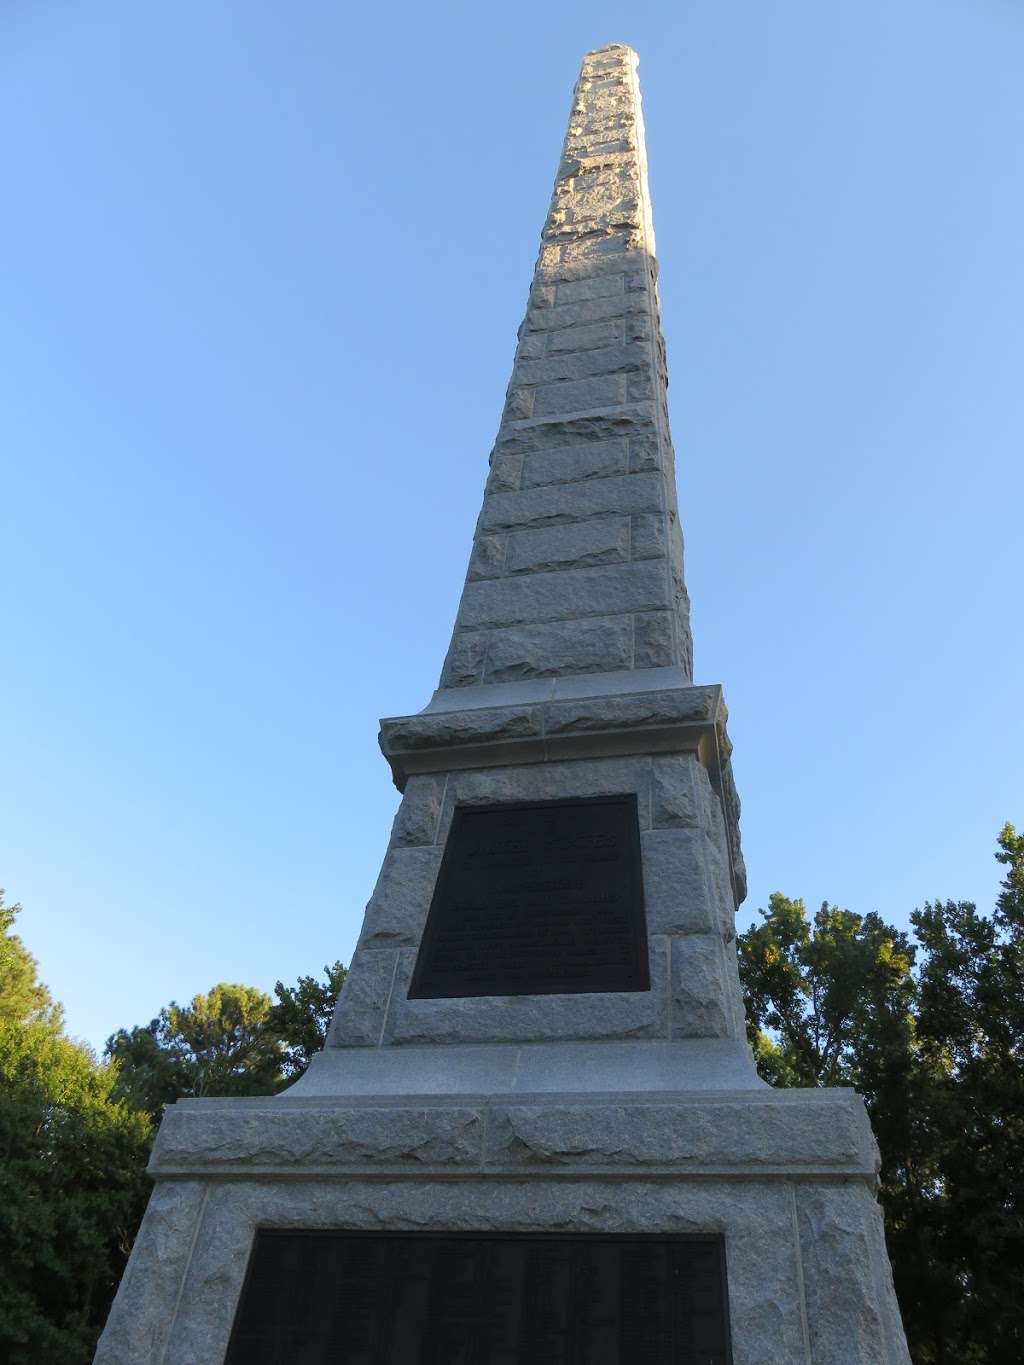 Point Lookout Confederate Cemetery | 11655 Point Lookout Rd, Scotland, MD 20687